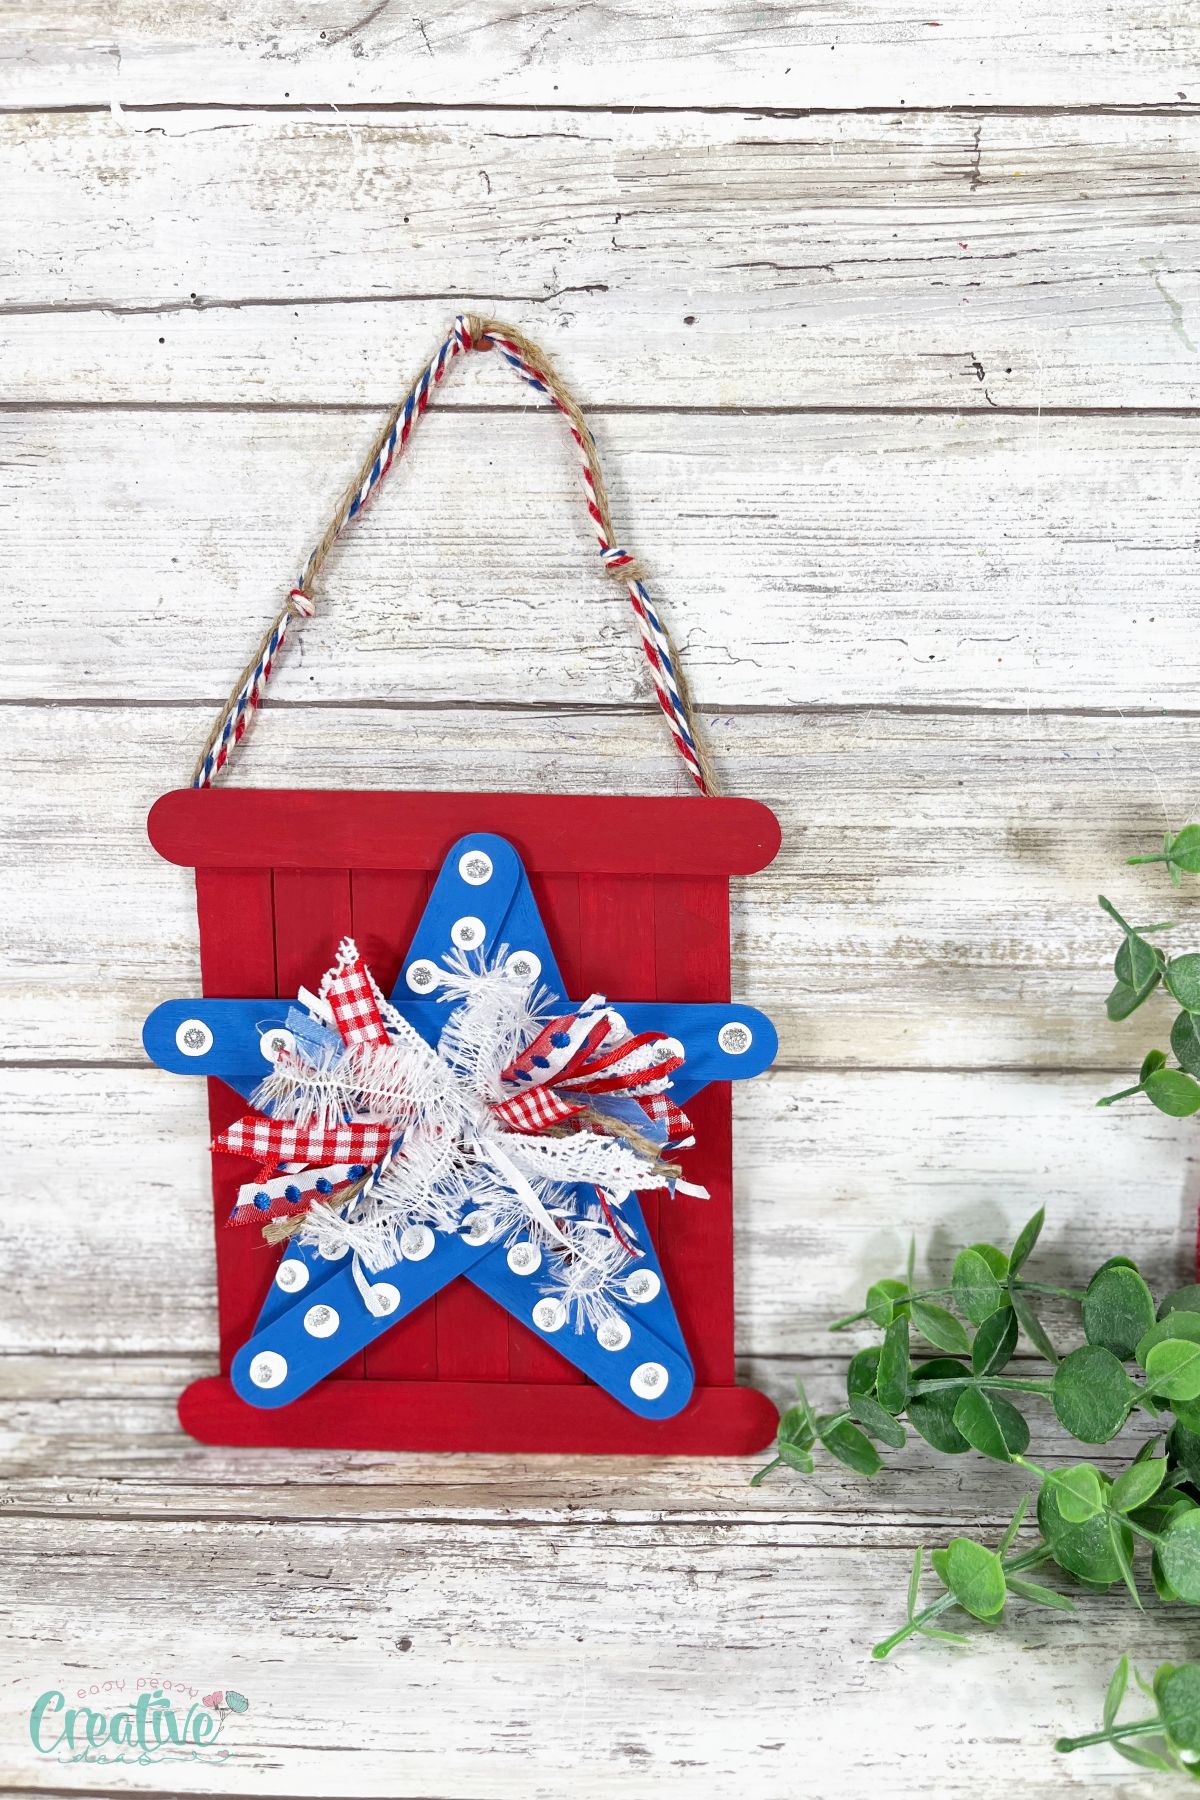 Craft stick star for 4th of July